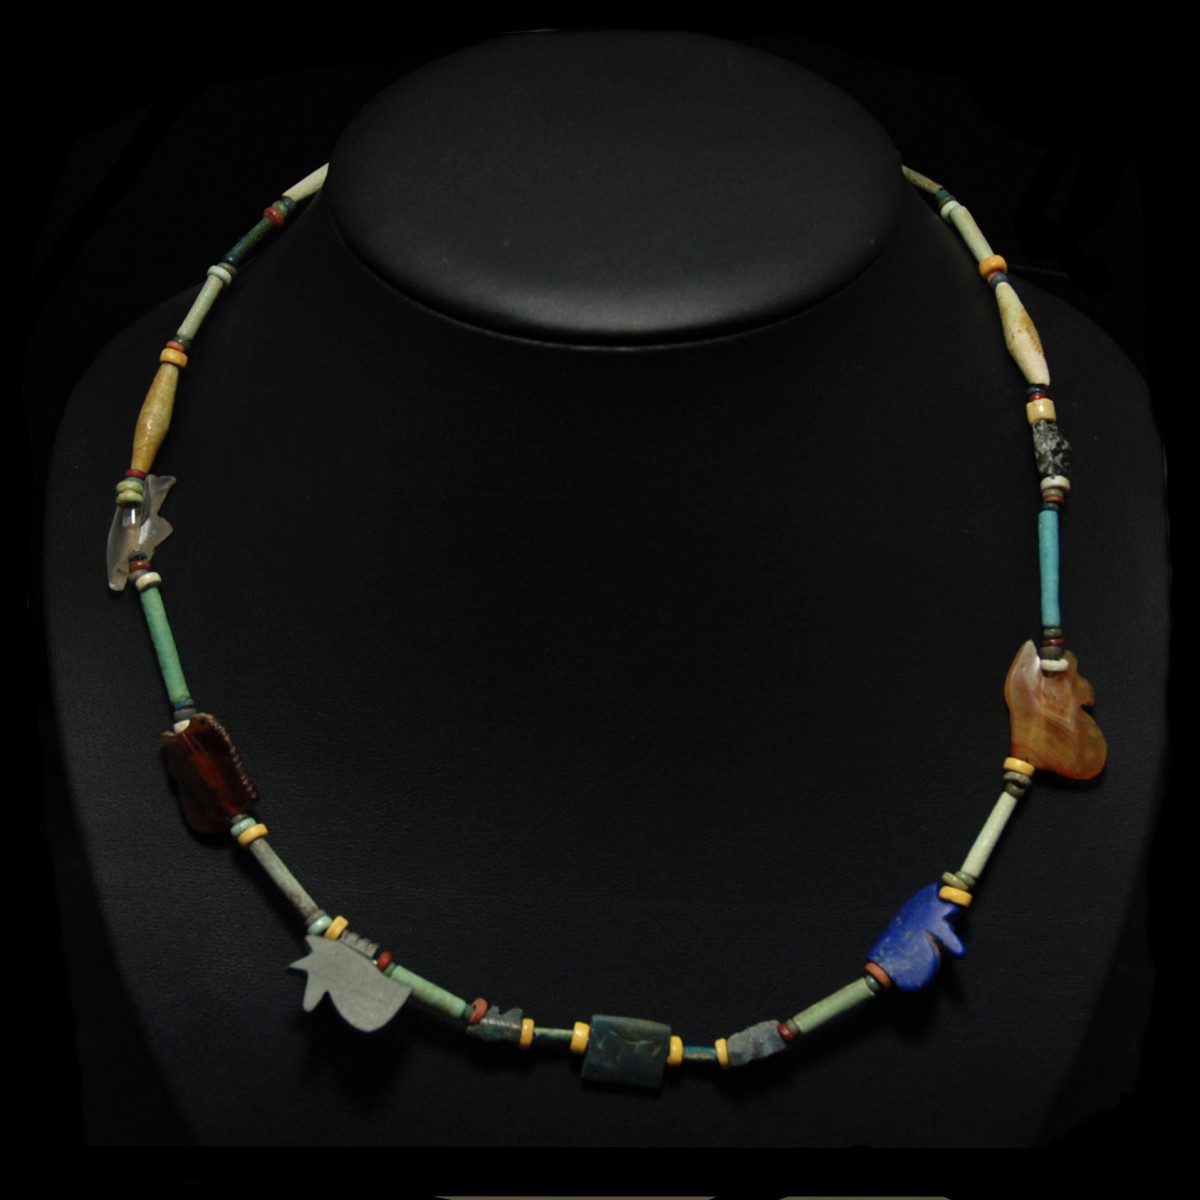 Egyptian necklace with Horus eyes and fayence beads